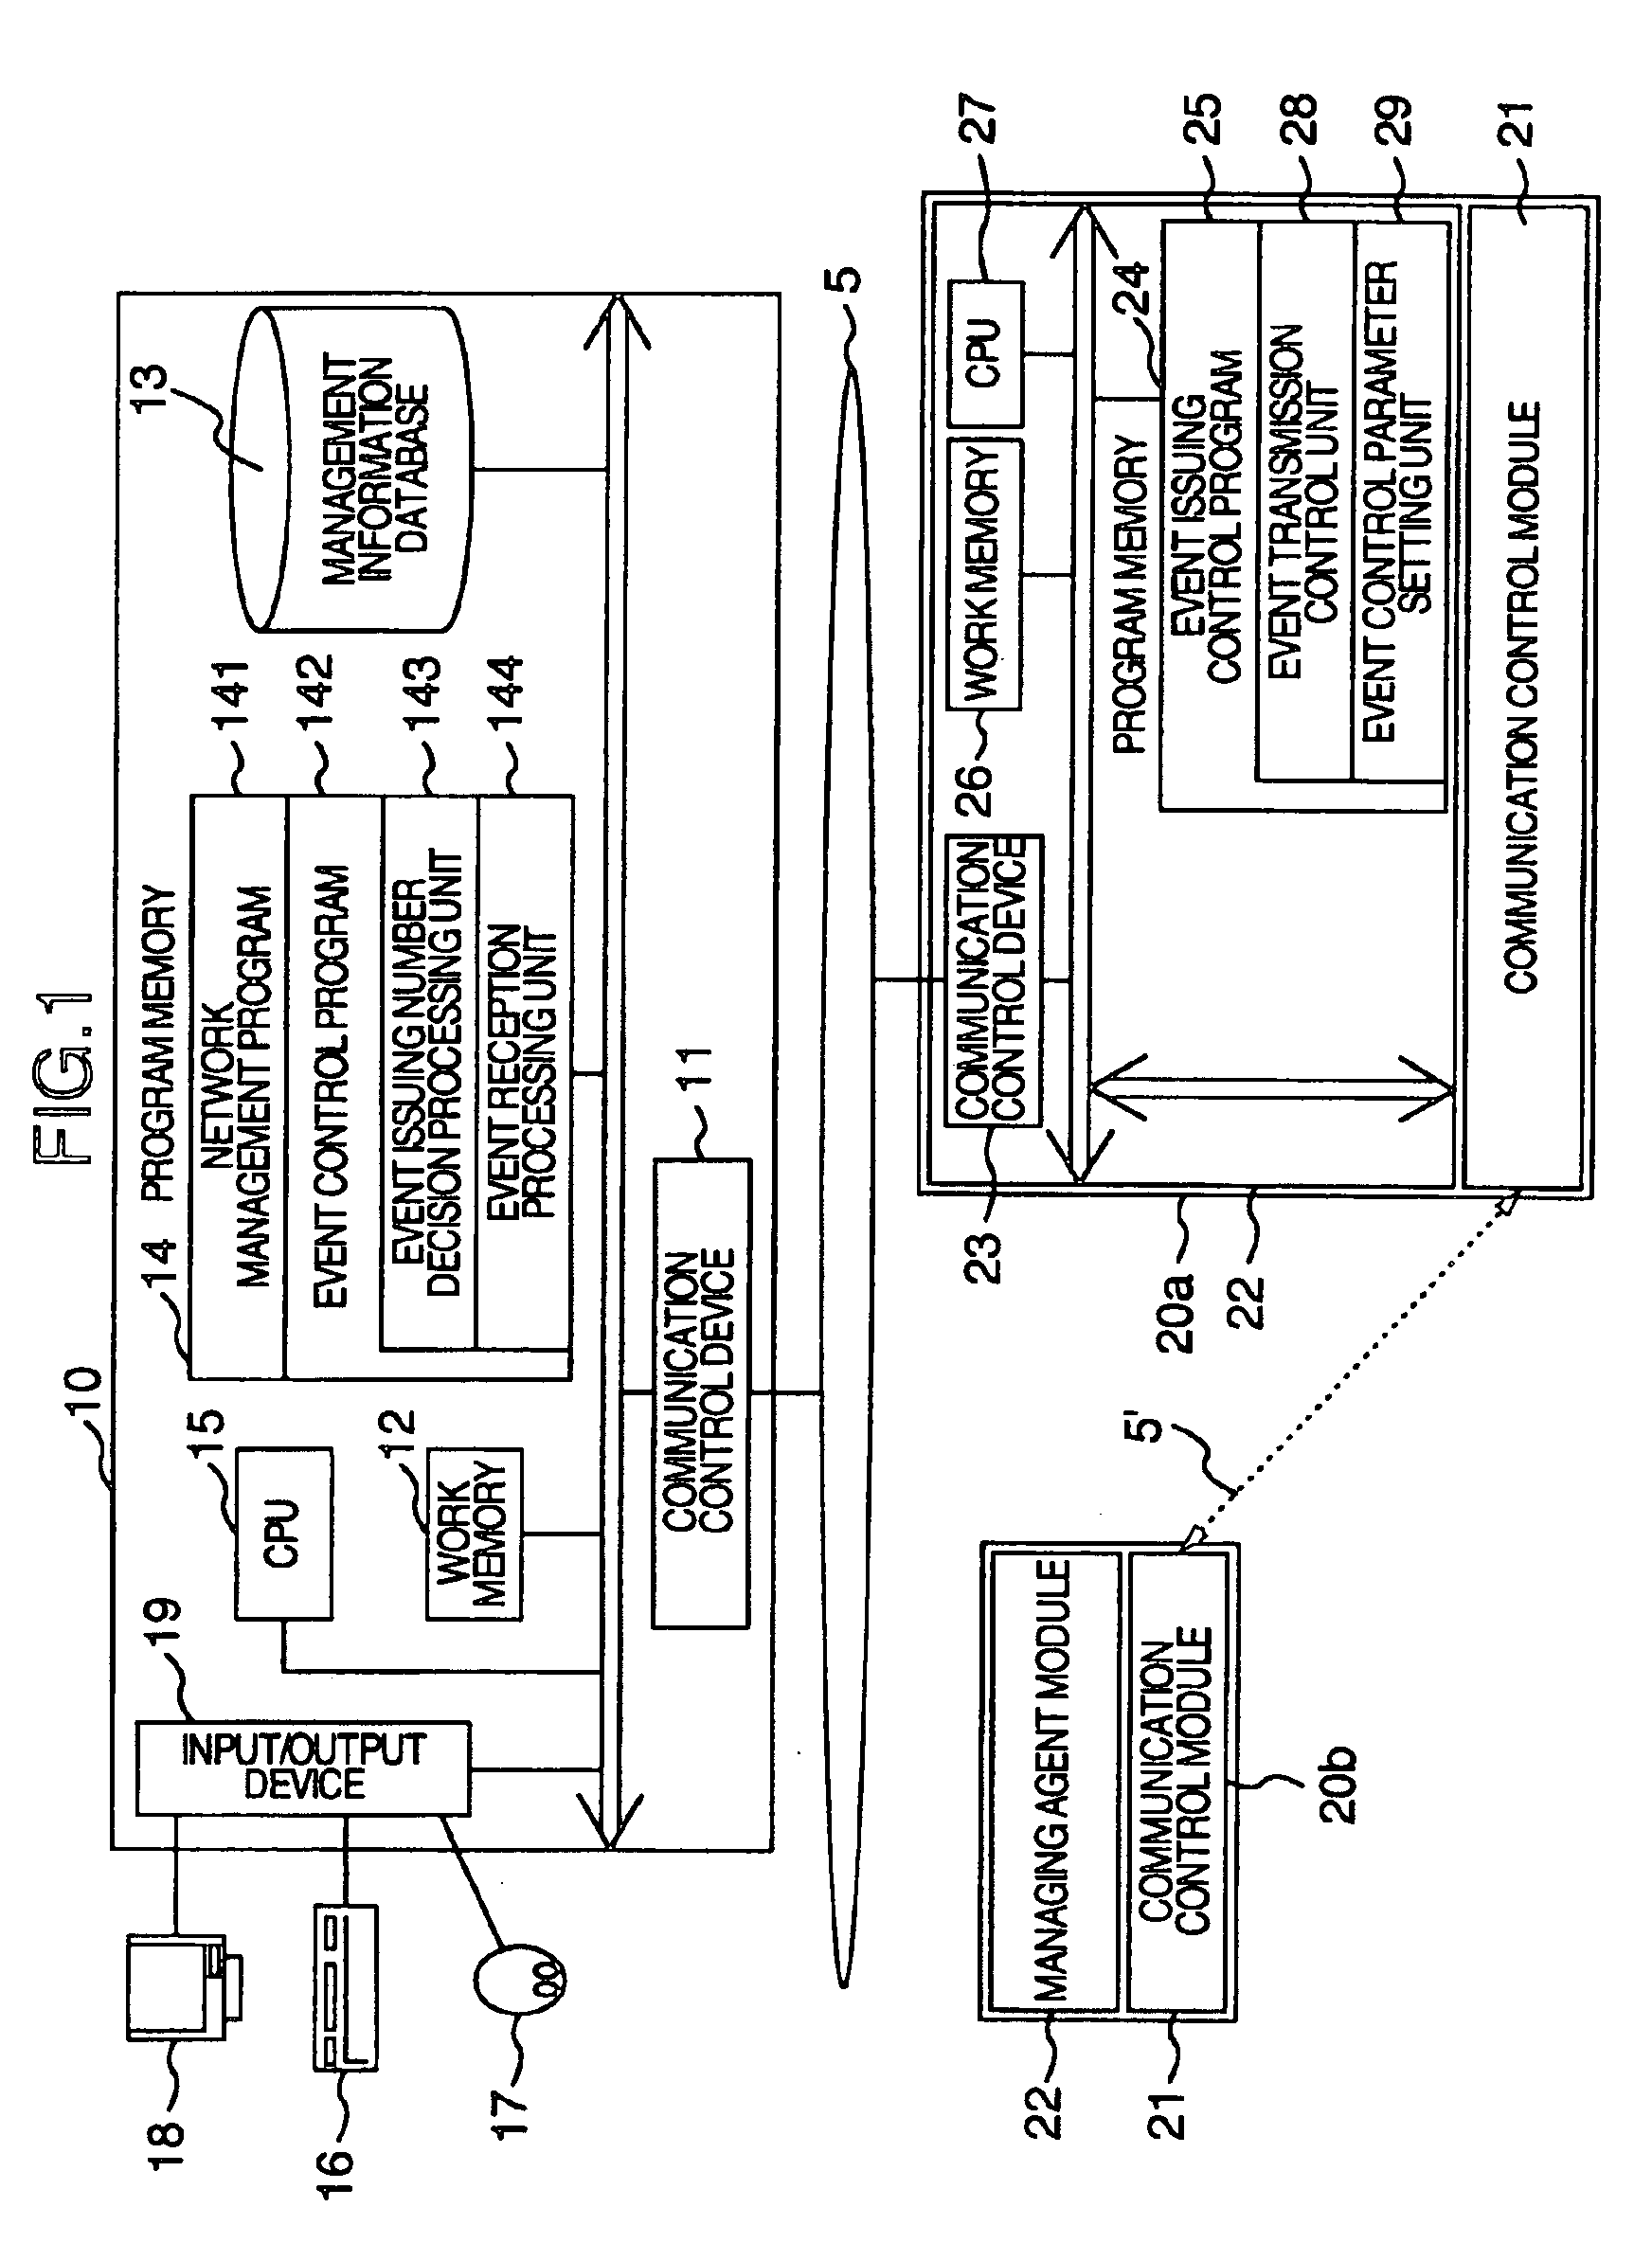 Network management system equipped with event control means and method